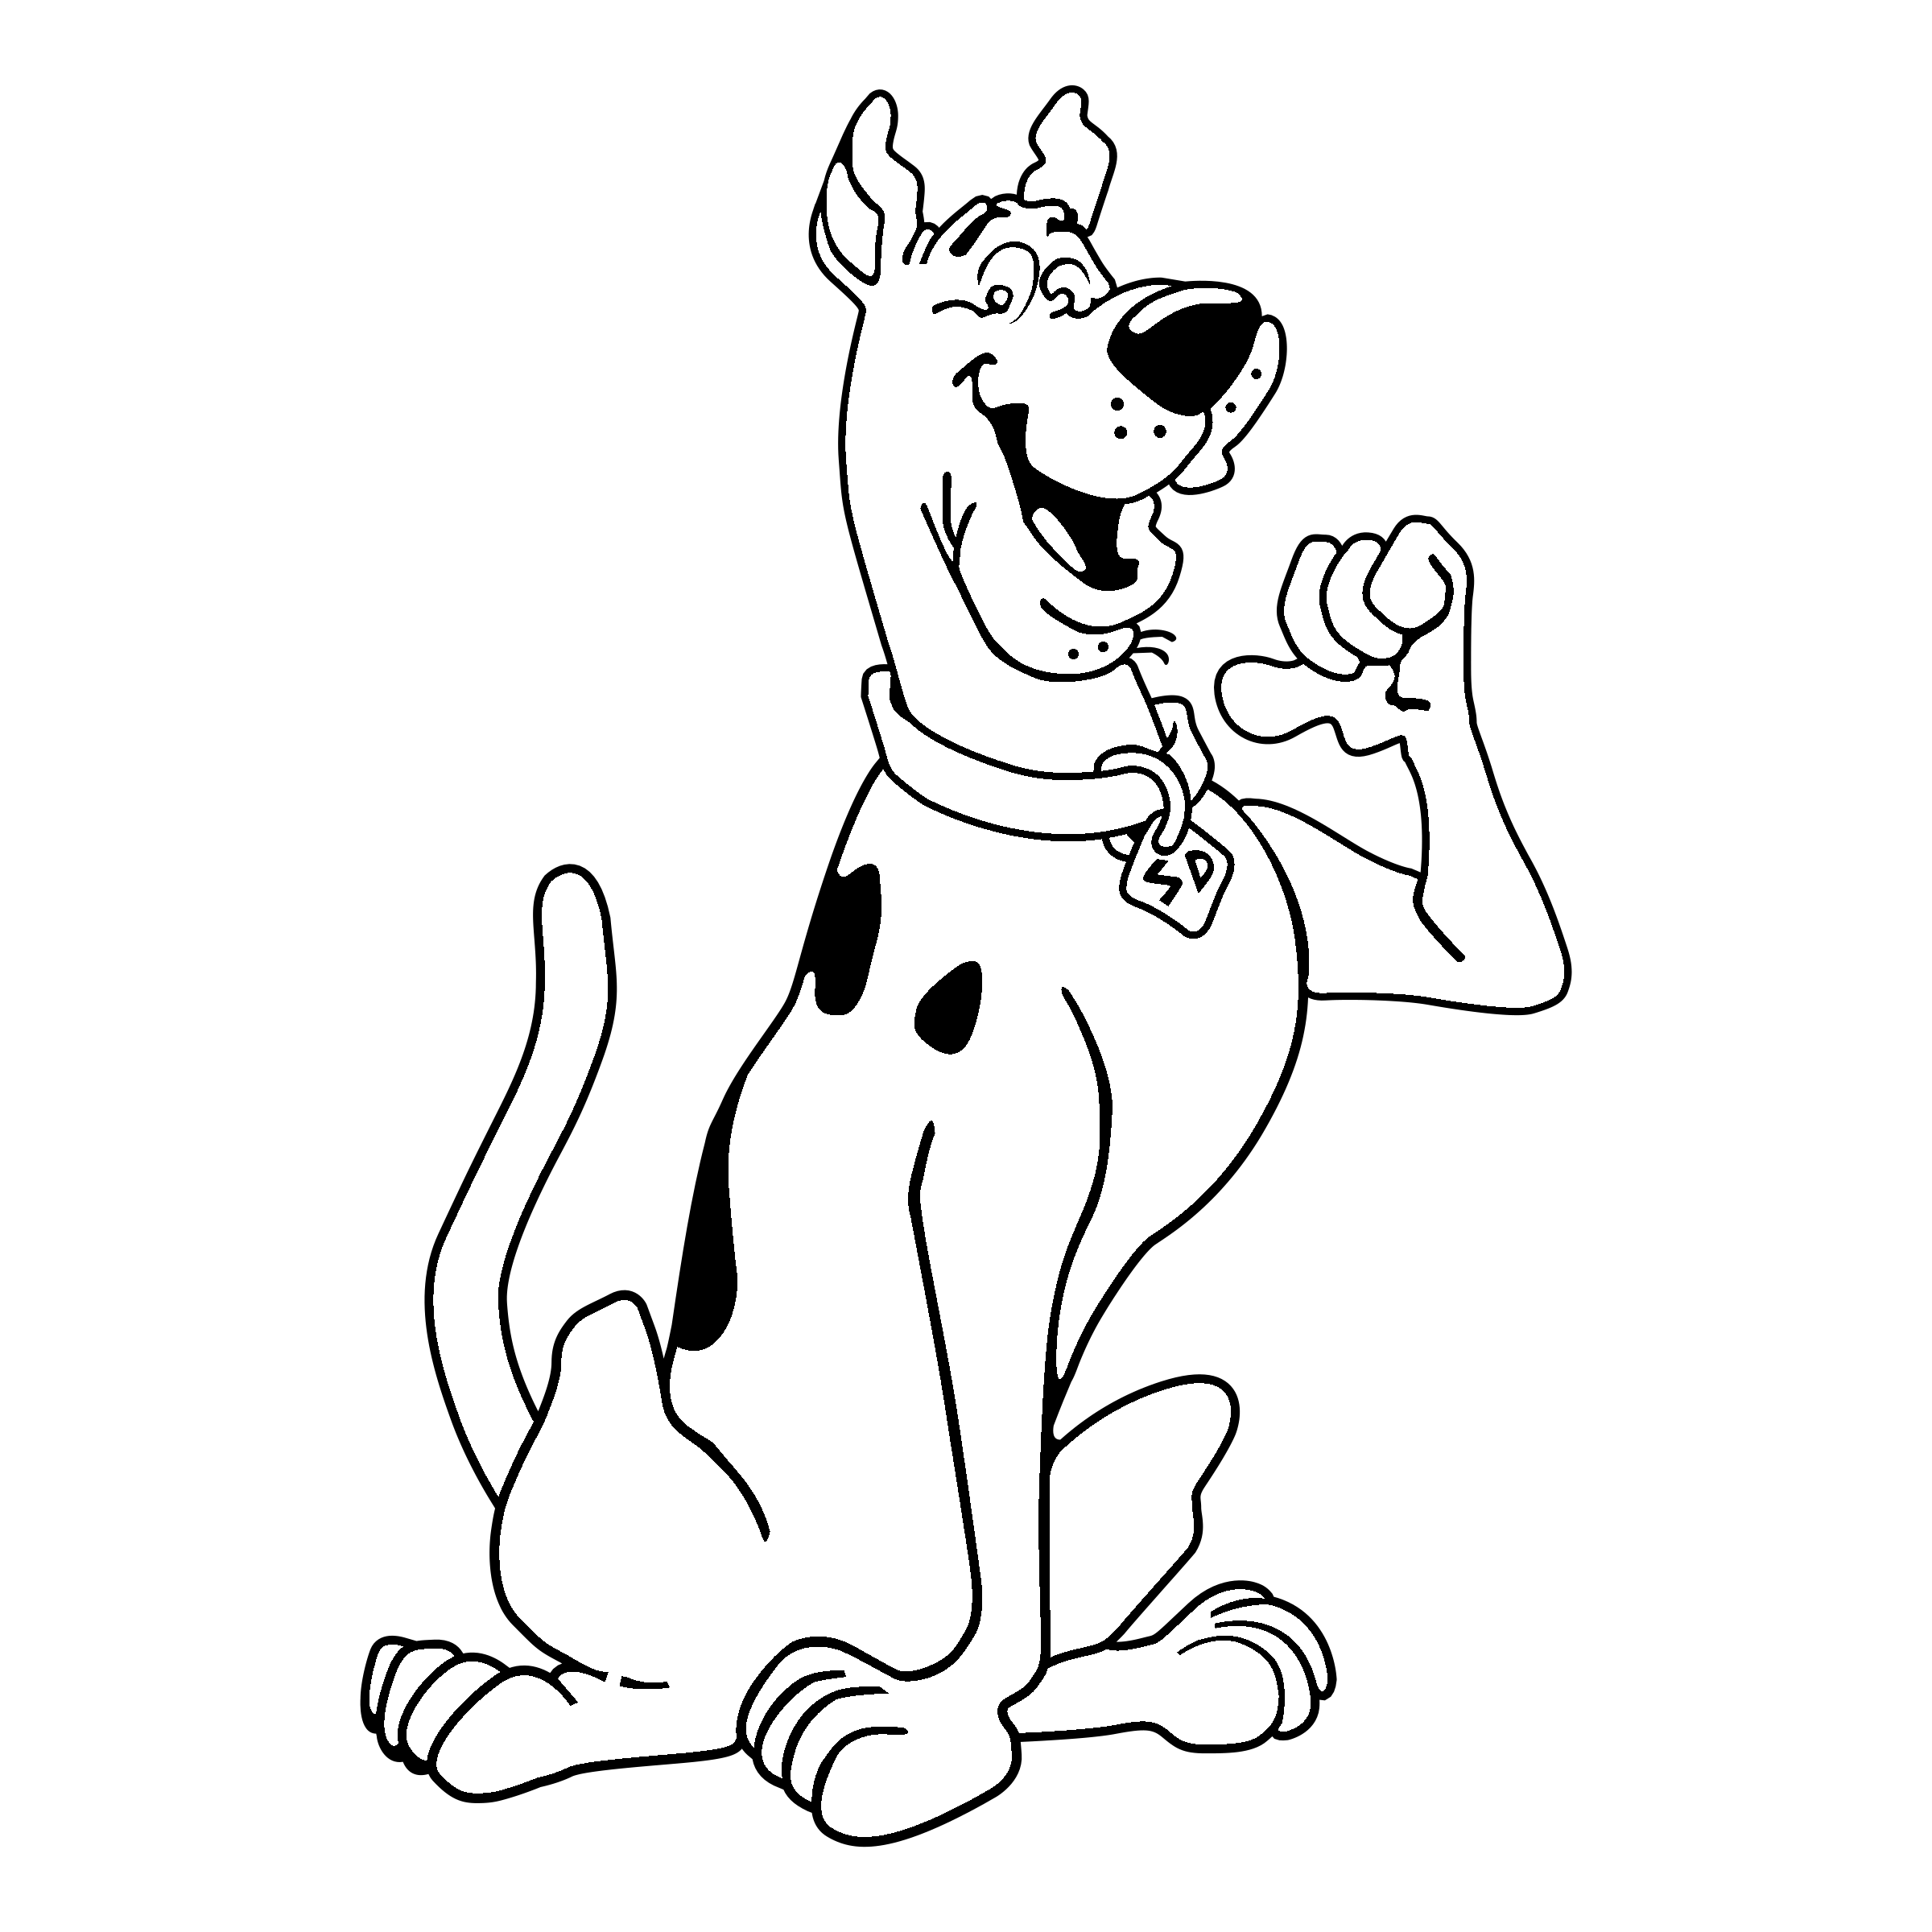 Scooby doo clipart black and white, Scooby doo black and white ...